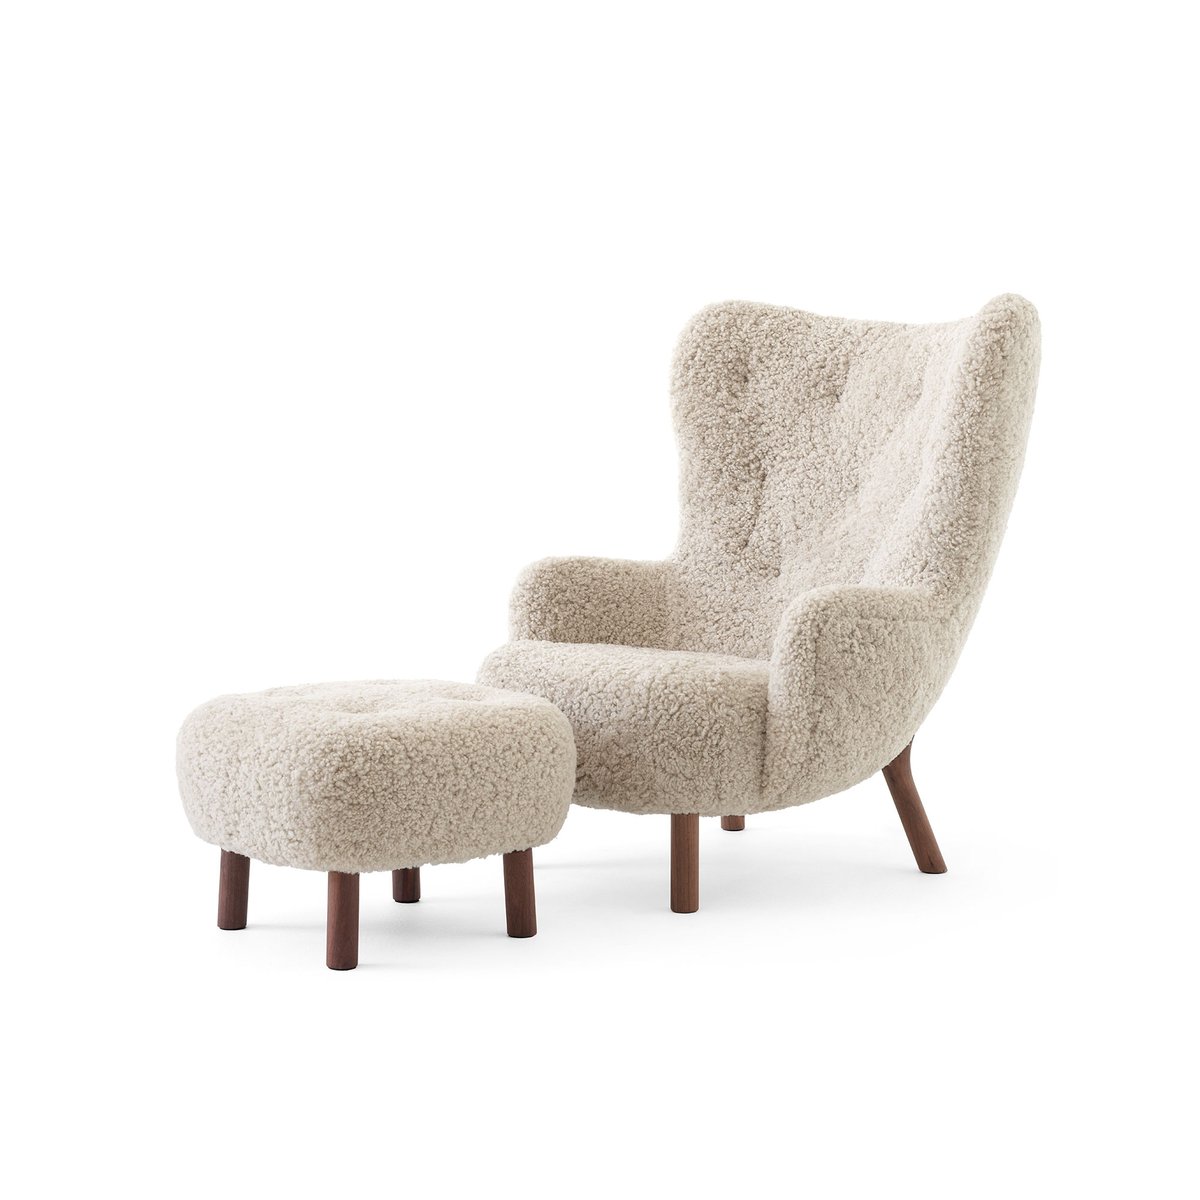 &Tradition Petra VB3 High fauteuil incl. poef ATD1 Geoliede walnoot-Sheepskin Moonlight